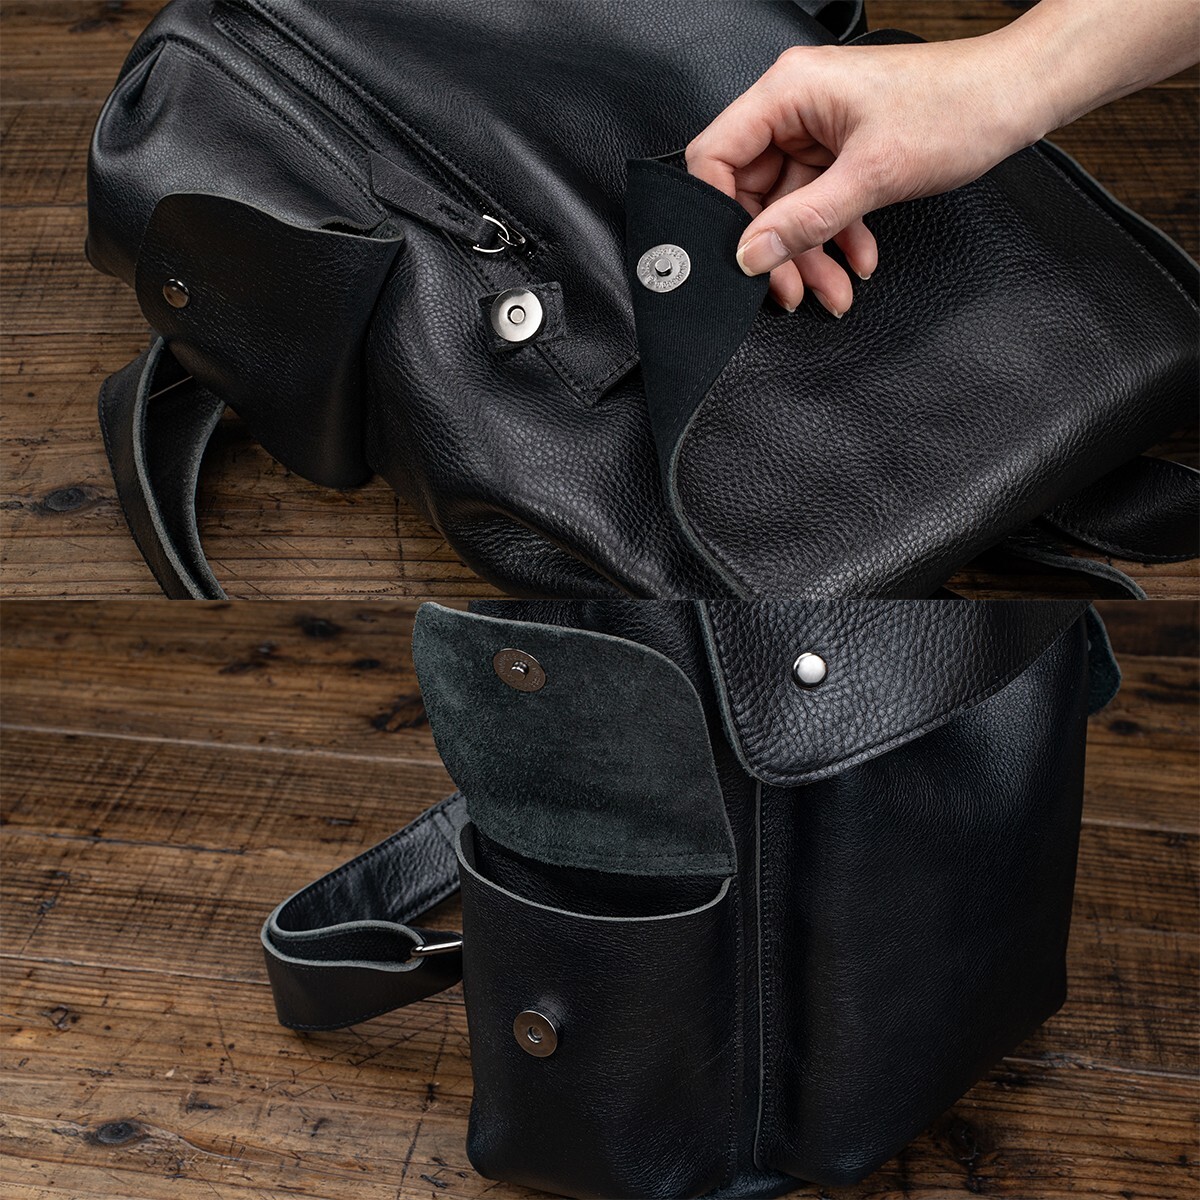 [ new goods ] original leather rucksack backpack bag Day Pack bag bag cow leather leather unused free shipping 1 jpy black black rice field middle leather .